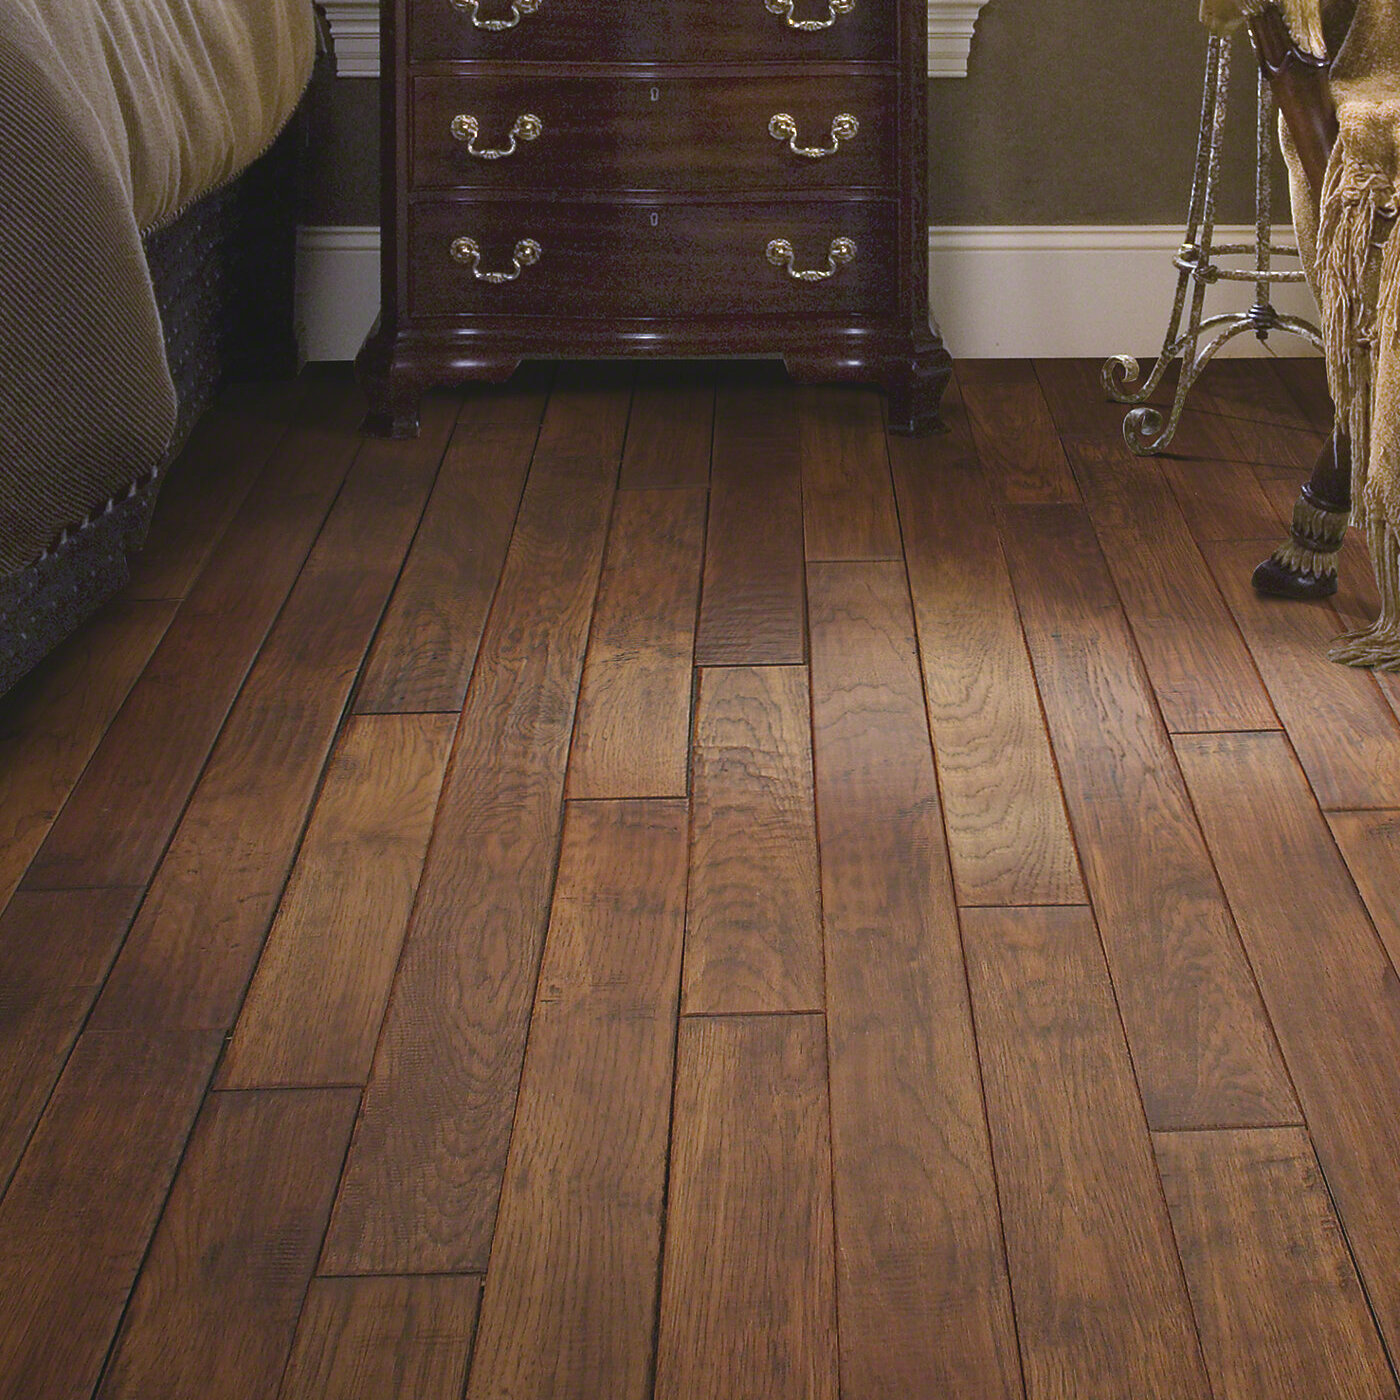 Forest Valley Flooring Fallon Hickory 3 8 Thick X 4 Wide Solid